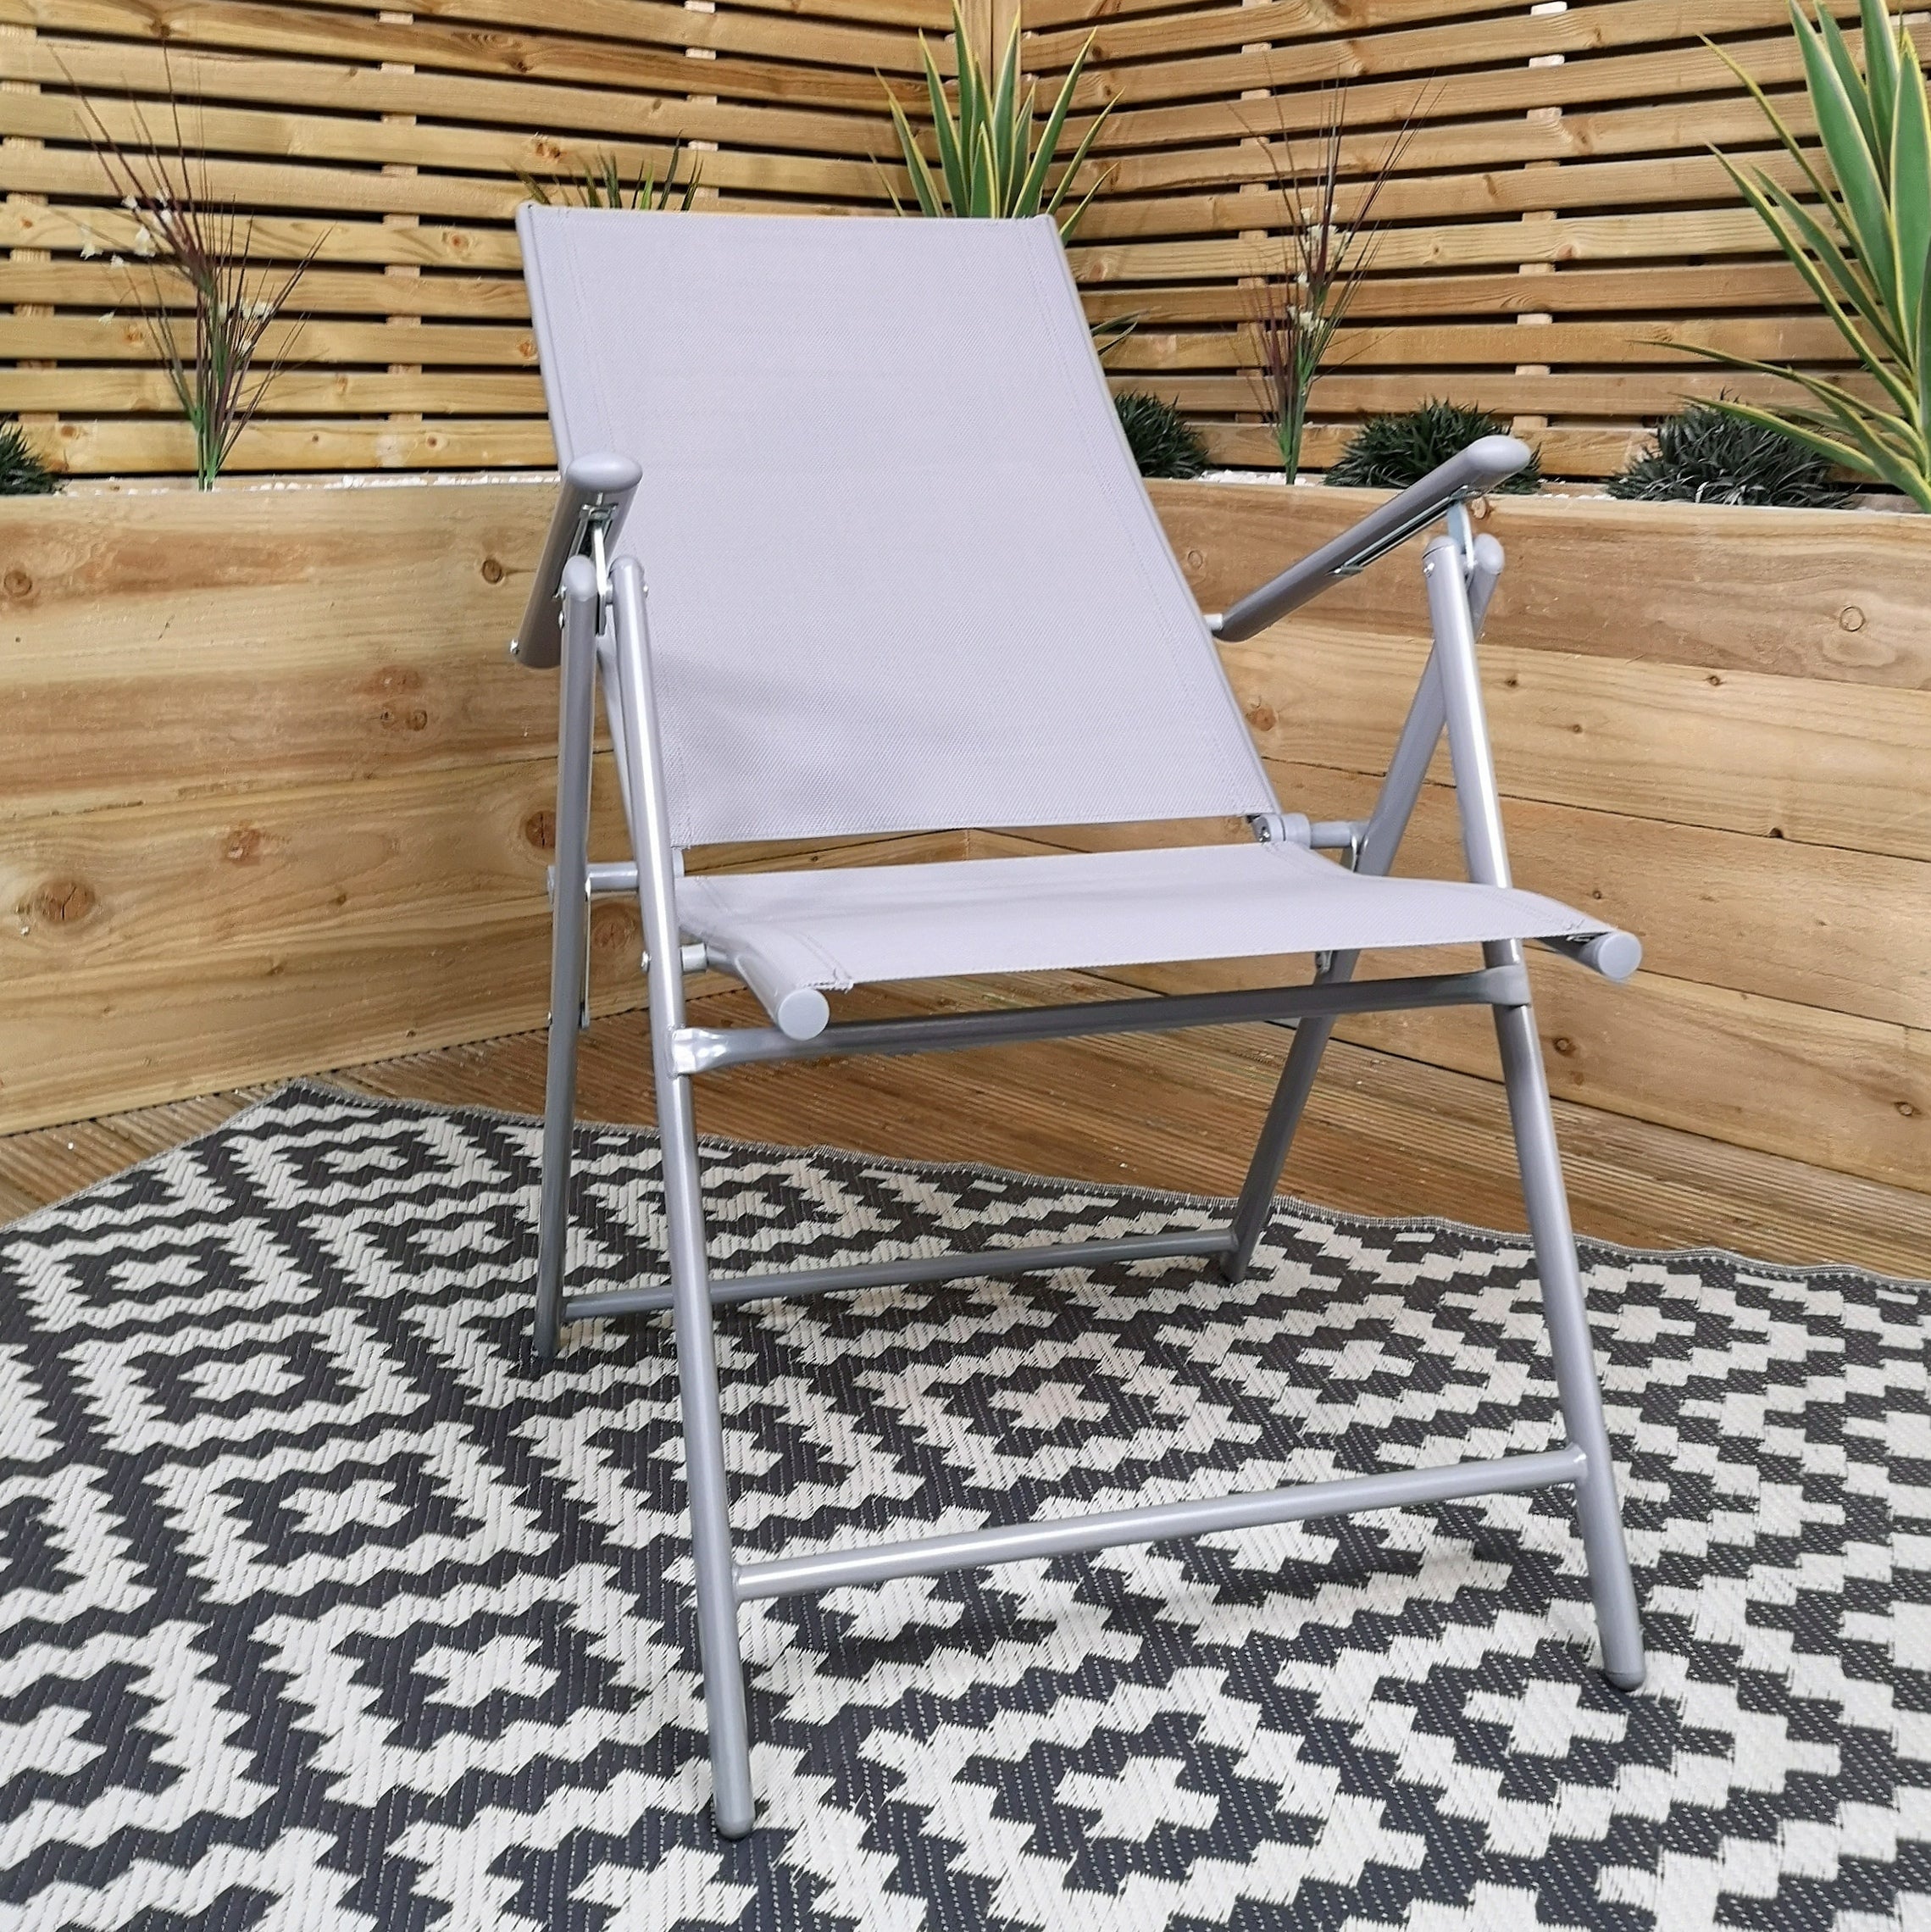 Set of 2 Outdoor Garden Patio Multi Position Reclining Folding Chair in Grey